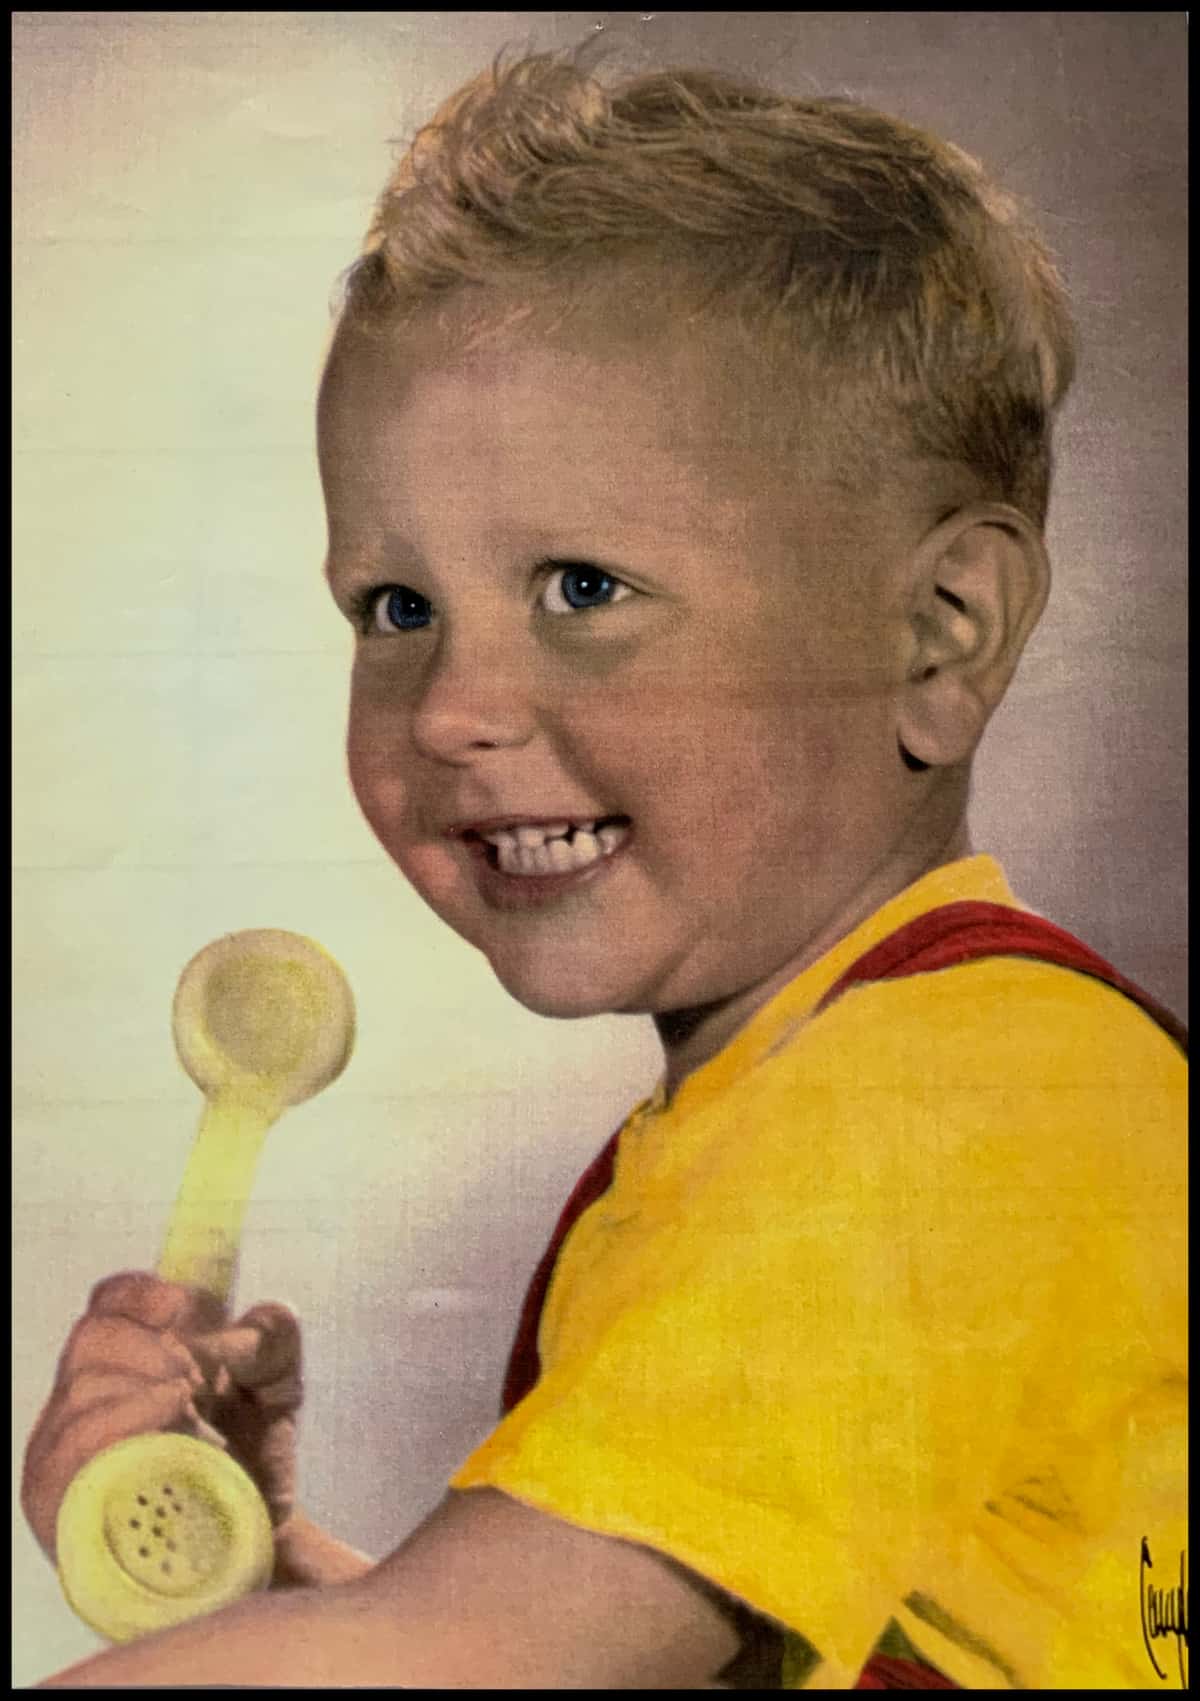 Dennis as a child - Land Of The Rising Son